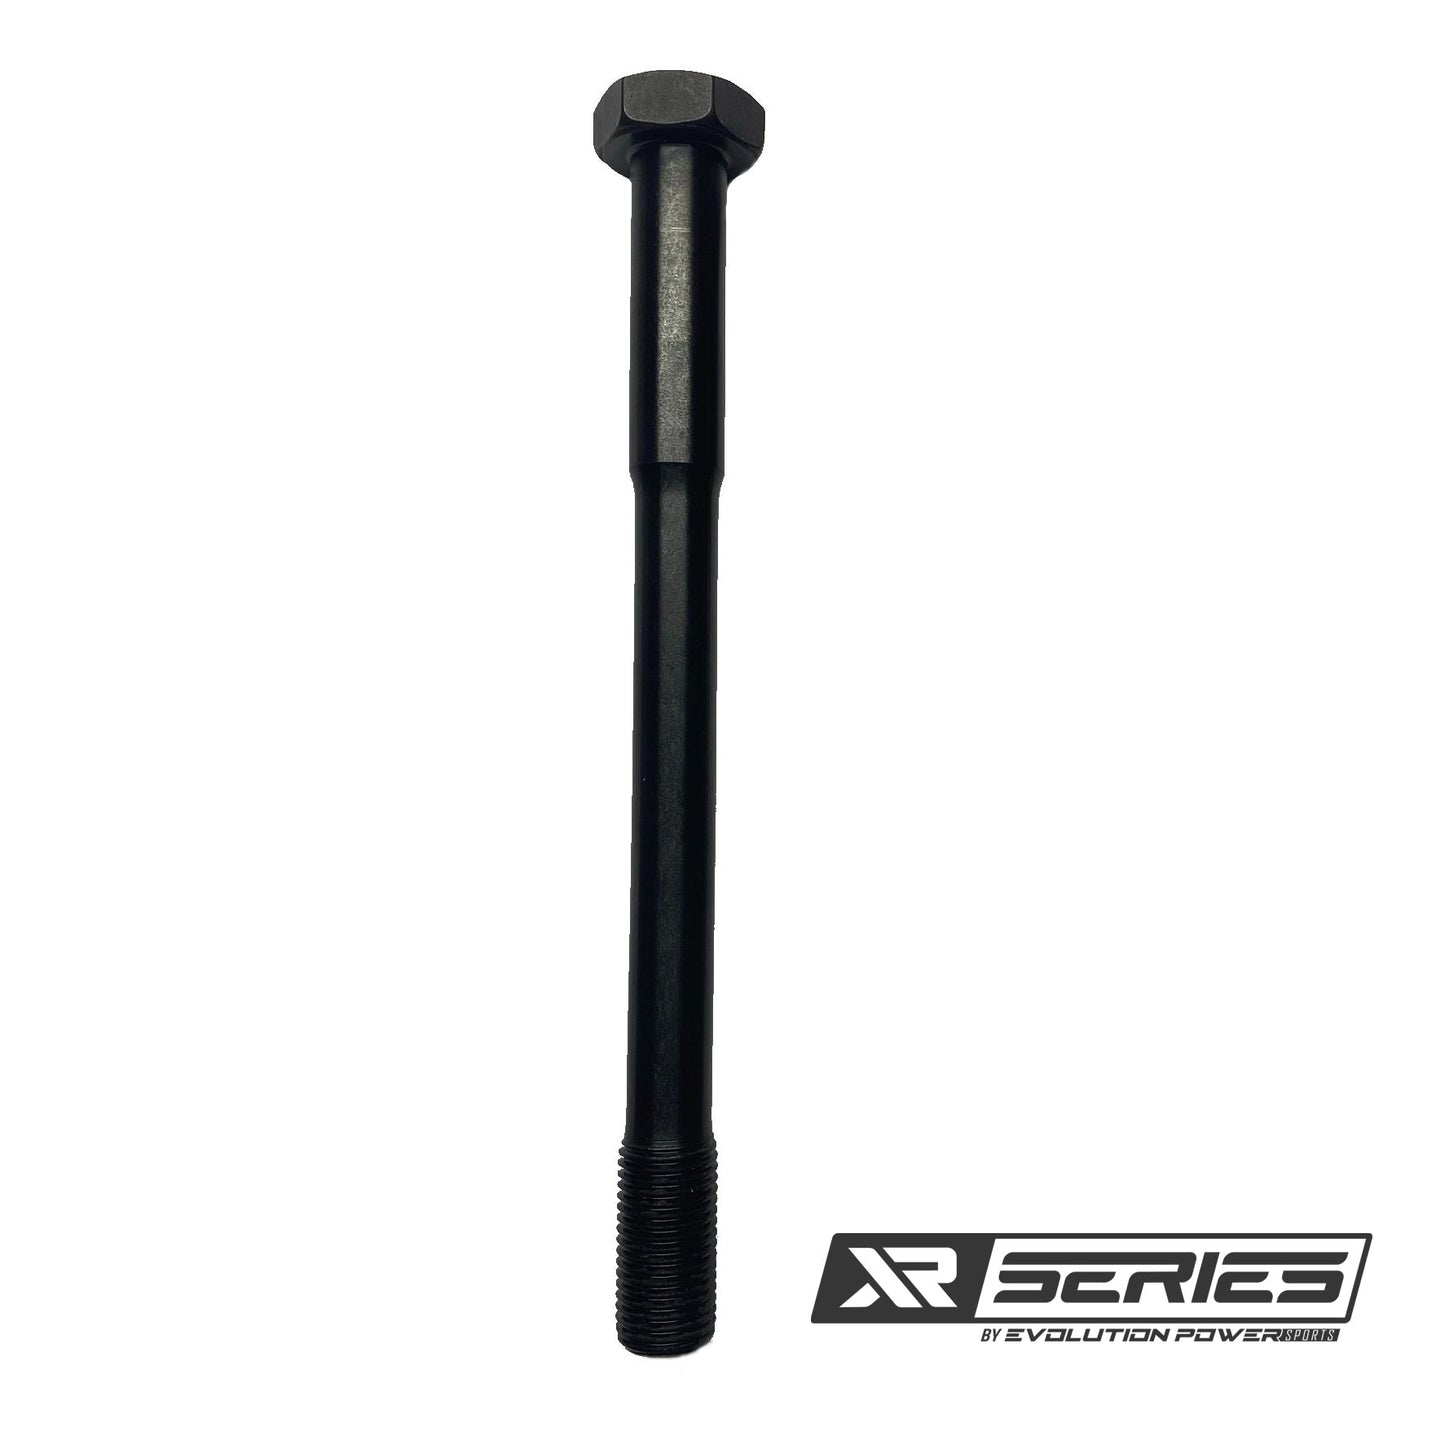 XR Series Primary Clutch Bolt for Can Am Maverick X3